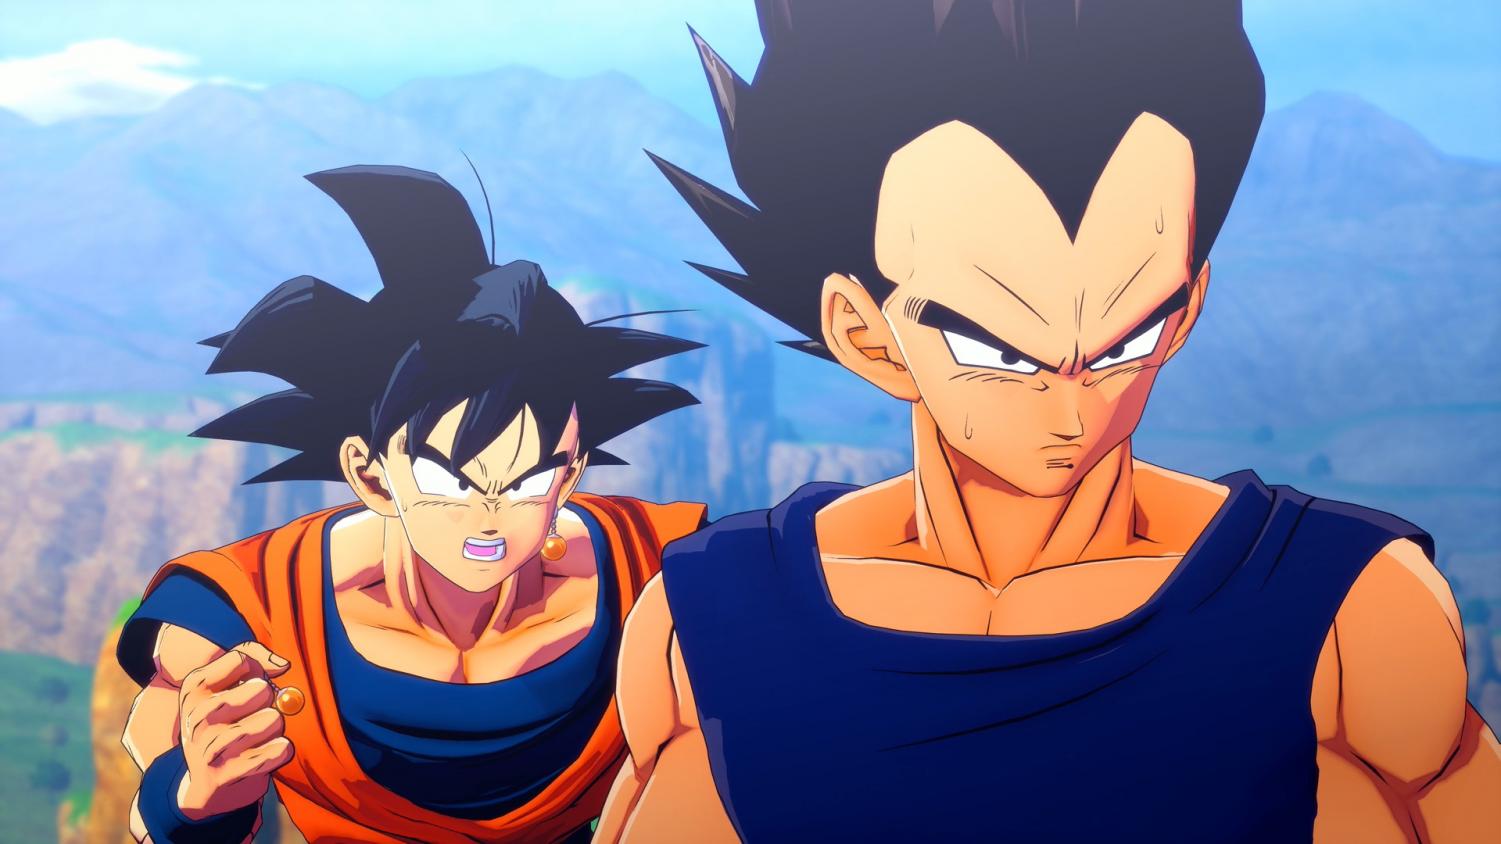 Dragon Ball Z: Kakarot (2020 Video Game) - Behind The Voice Actors